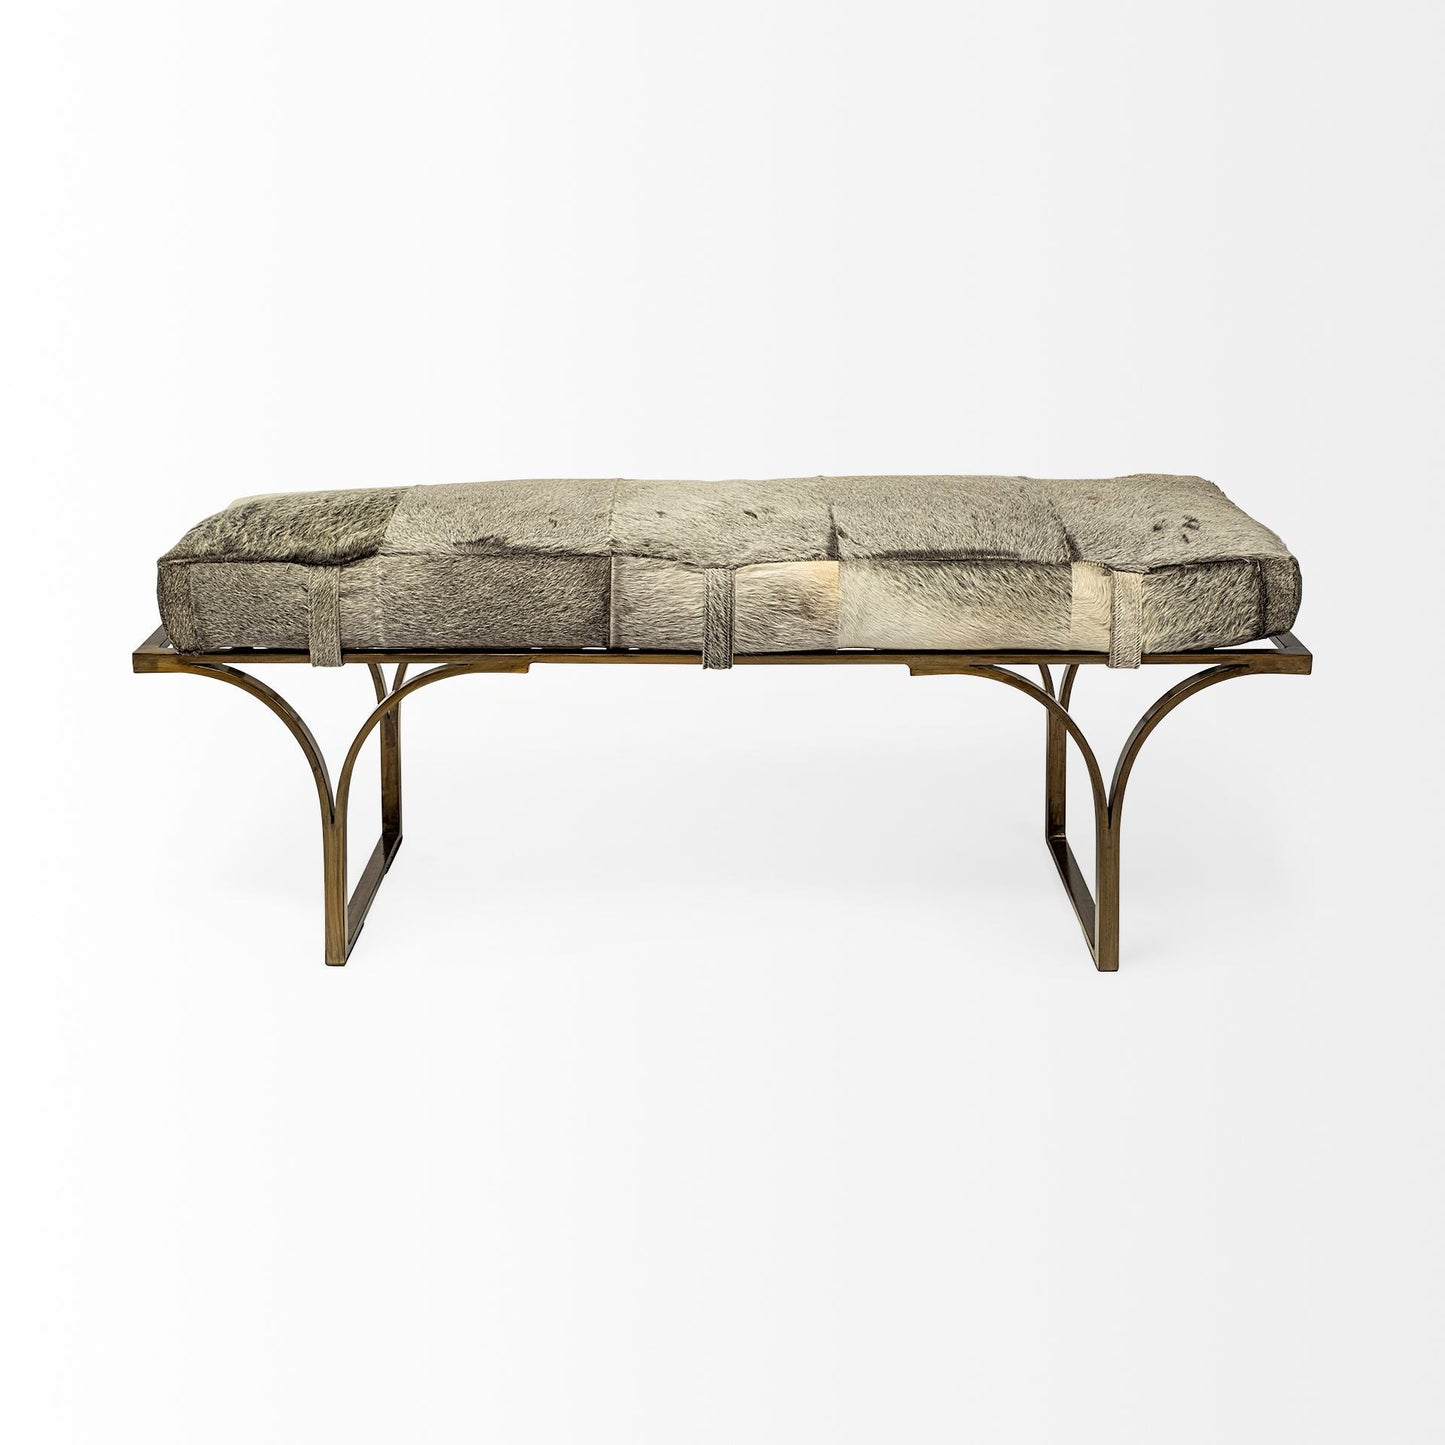 Rectangular MetalAntique Brass W Grey-Toned Hair-On-Leather Seat Accent Bench By Homeroots